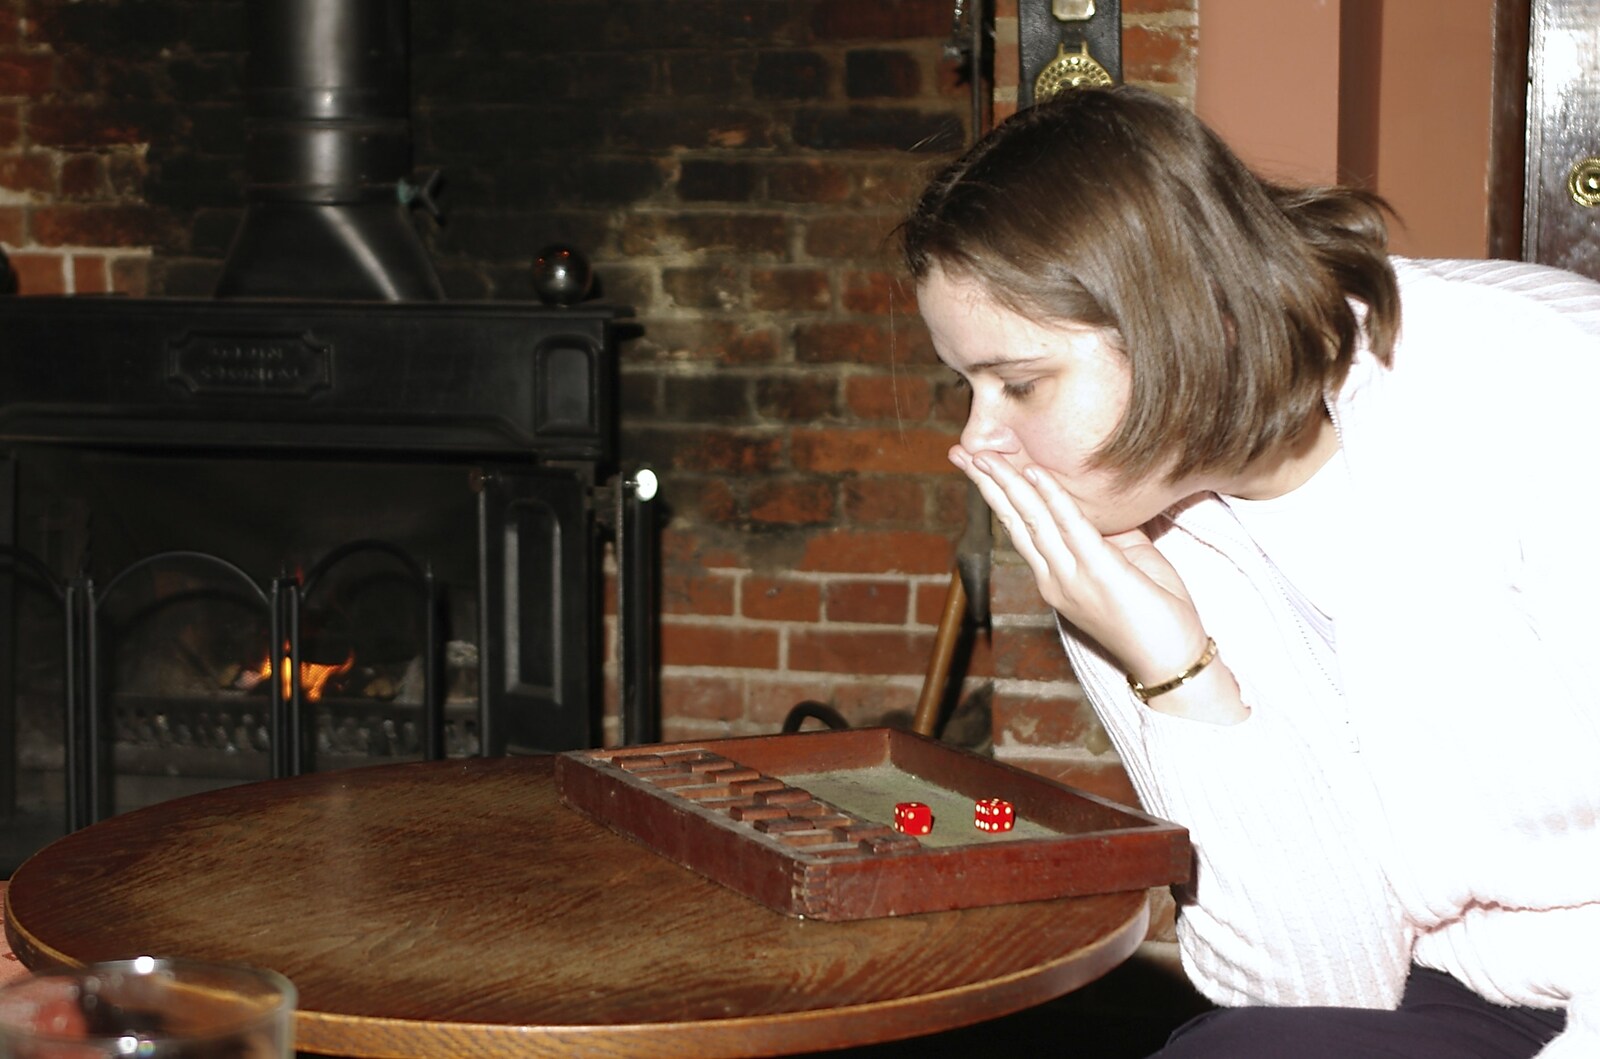 Christmas Day at the Brome Swan, Brome, Suffolk - 25th December 2004: Claire ponders her dice throw